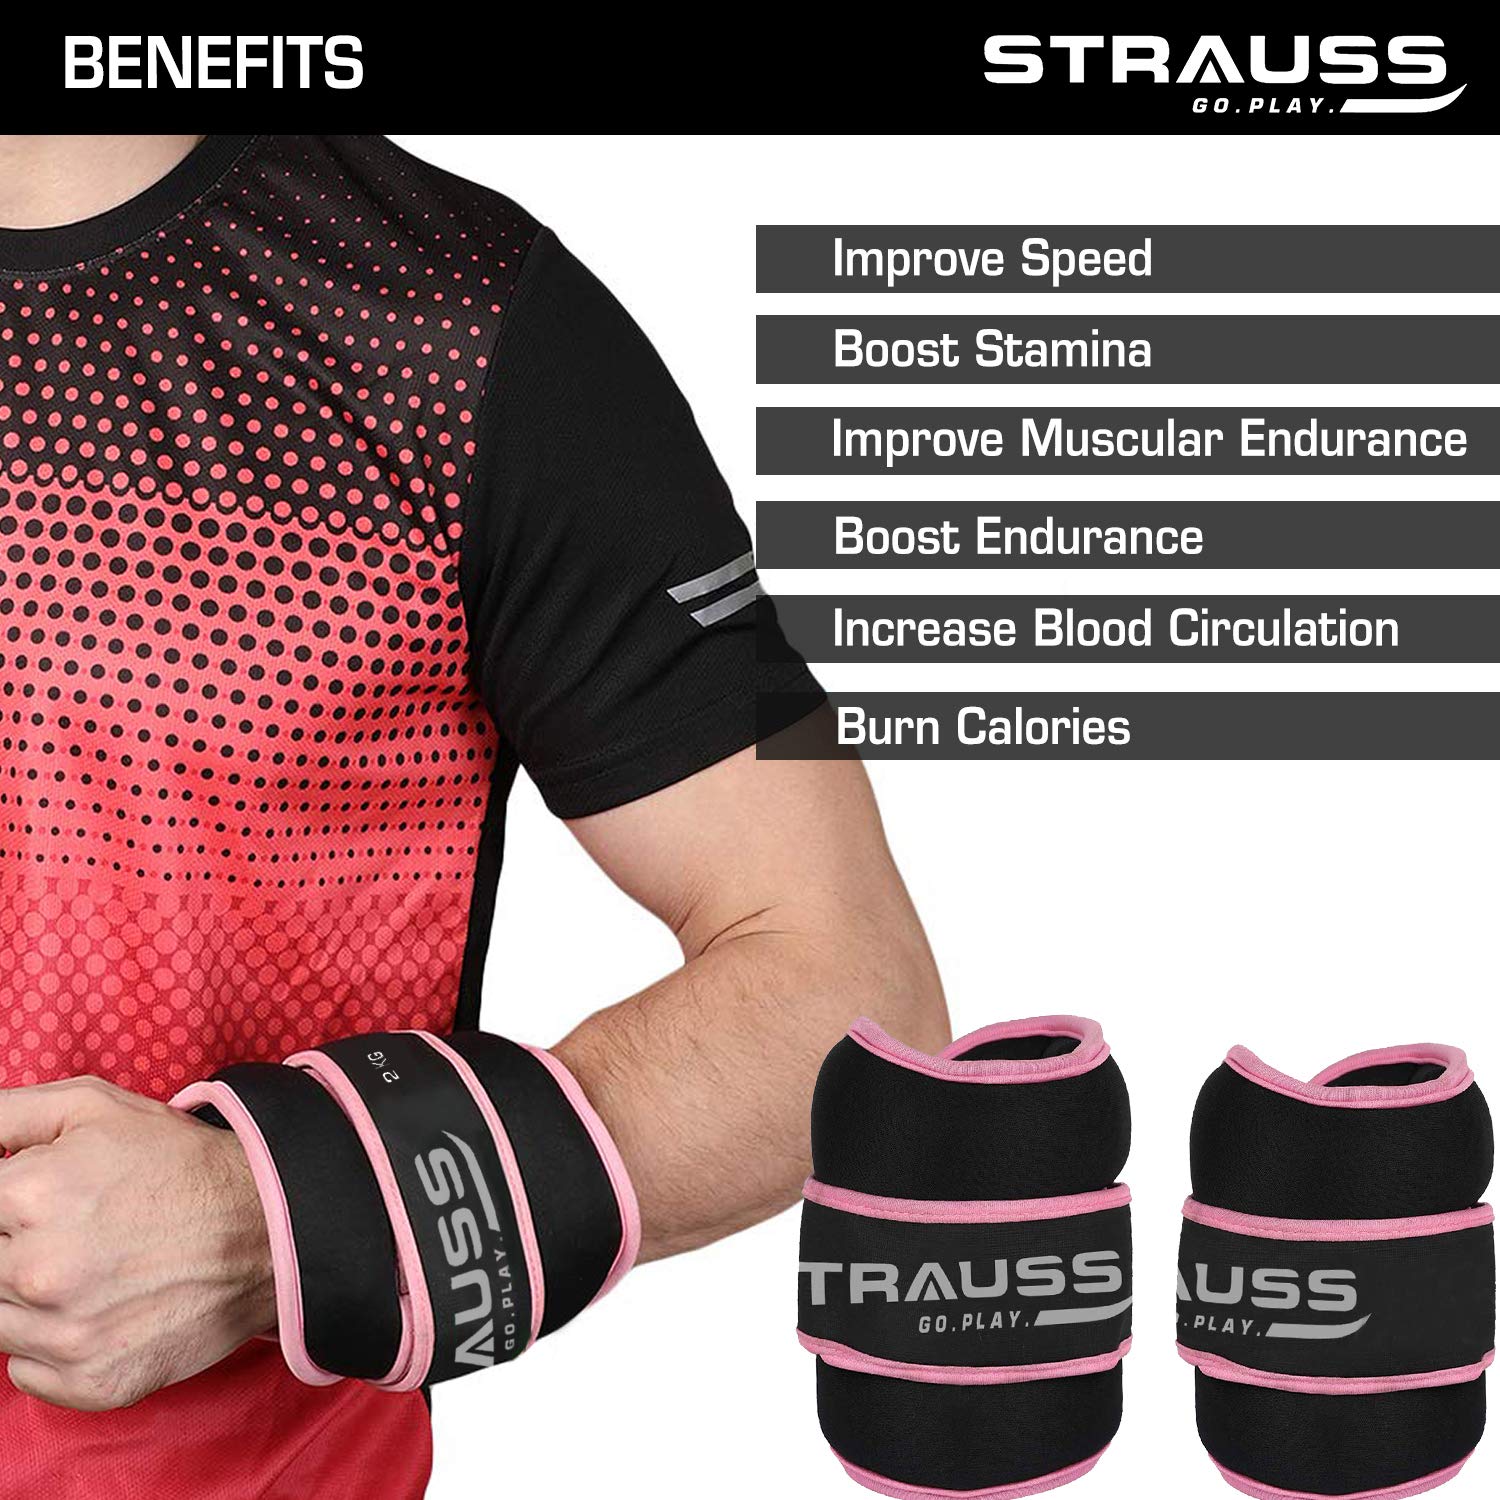 Strauss Round Shape Adjustable Ankle Weight/Wrist Weights 2 KG X 2 | Ideal for Walking, Running, Jogging, Cycling, Gym, Workout & Strength Training | Easy to Use on Ankle, Wrist, Leg, (Pink)